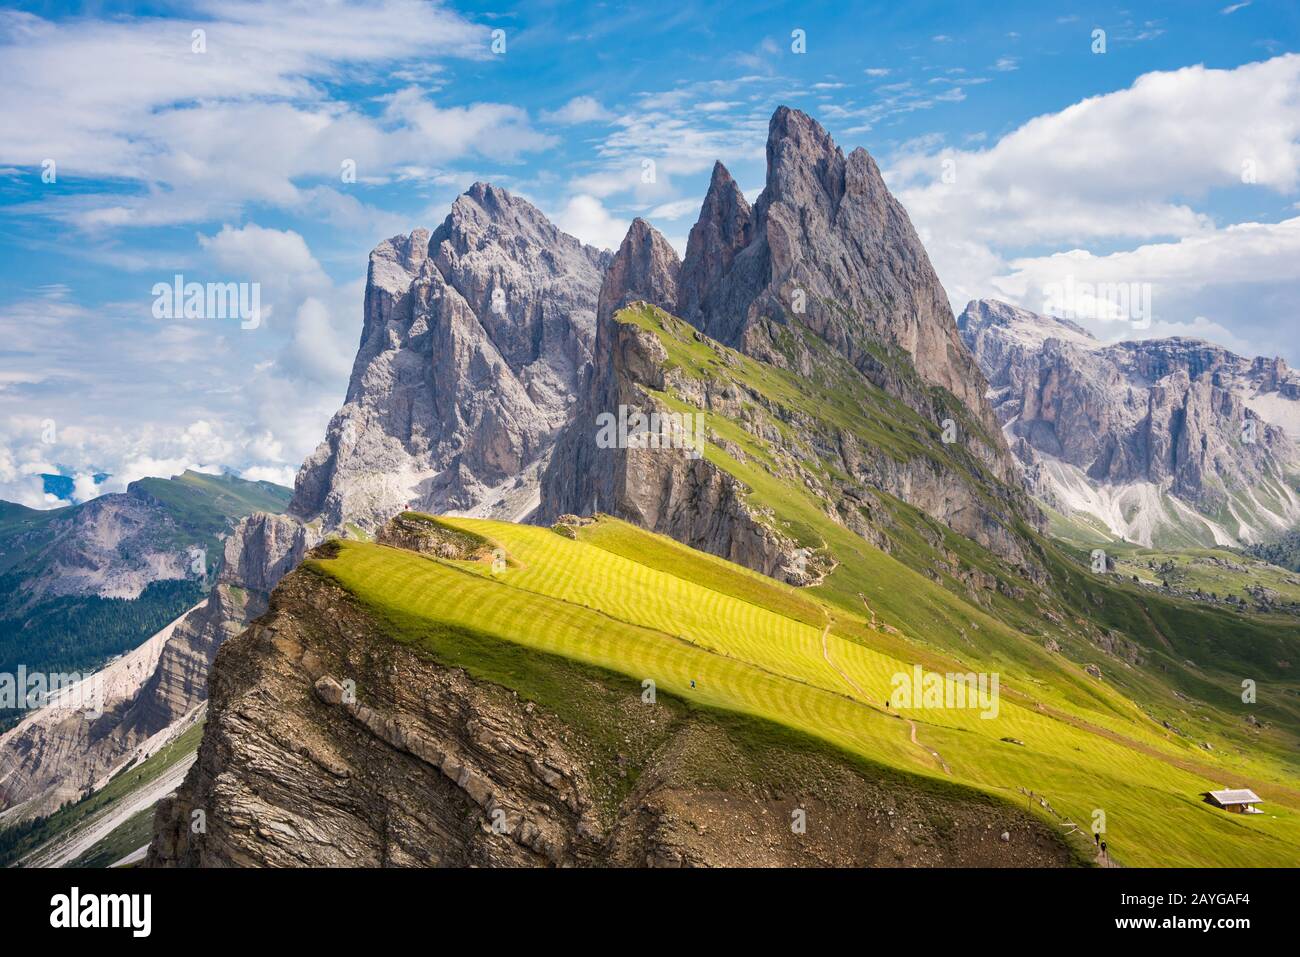 where are the alps located and which countries in europe does the alps mountain range cross